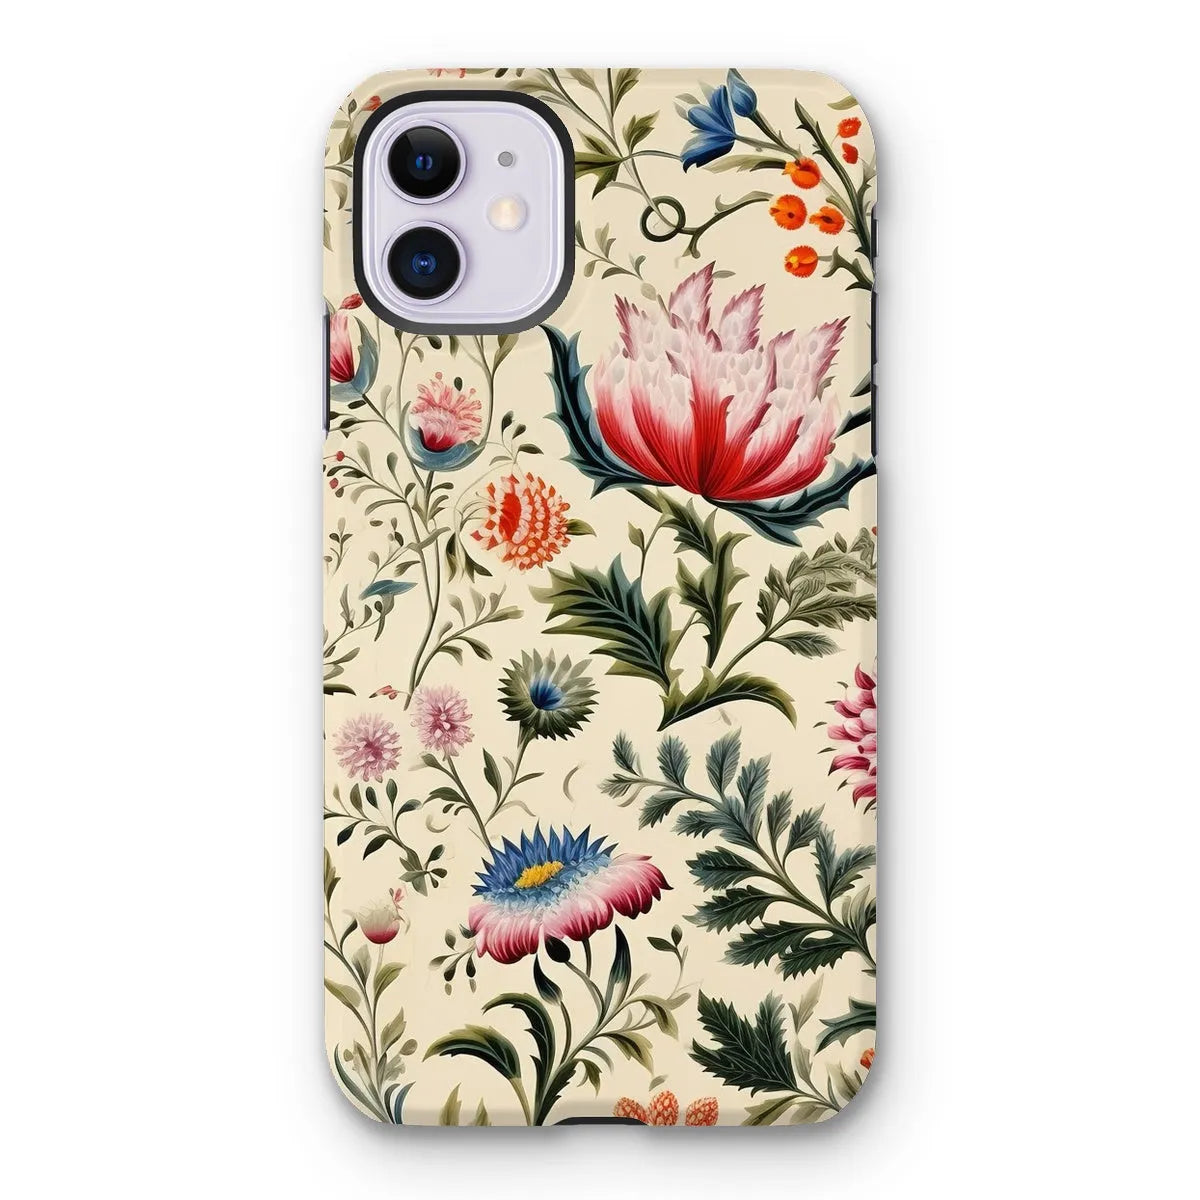 Wildflower Hoopla - Floral Garden Aesthetic Phone Case - Iphone 11 / Matte - Mobile Phone Cases - Aesthetic Art